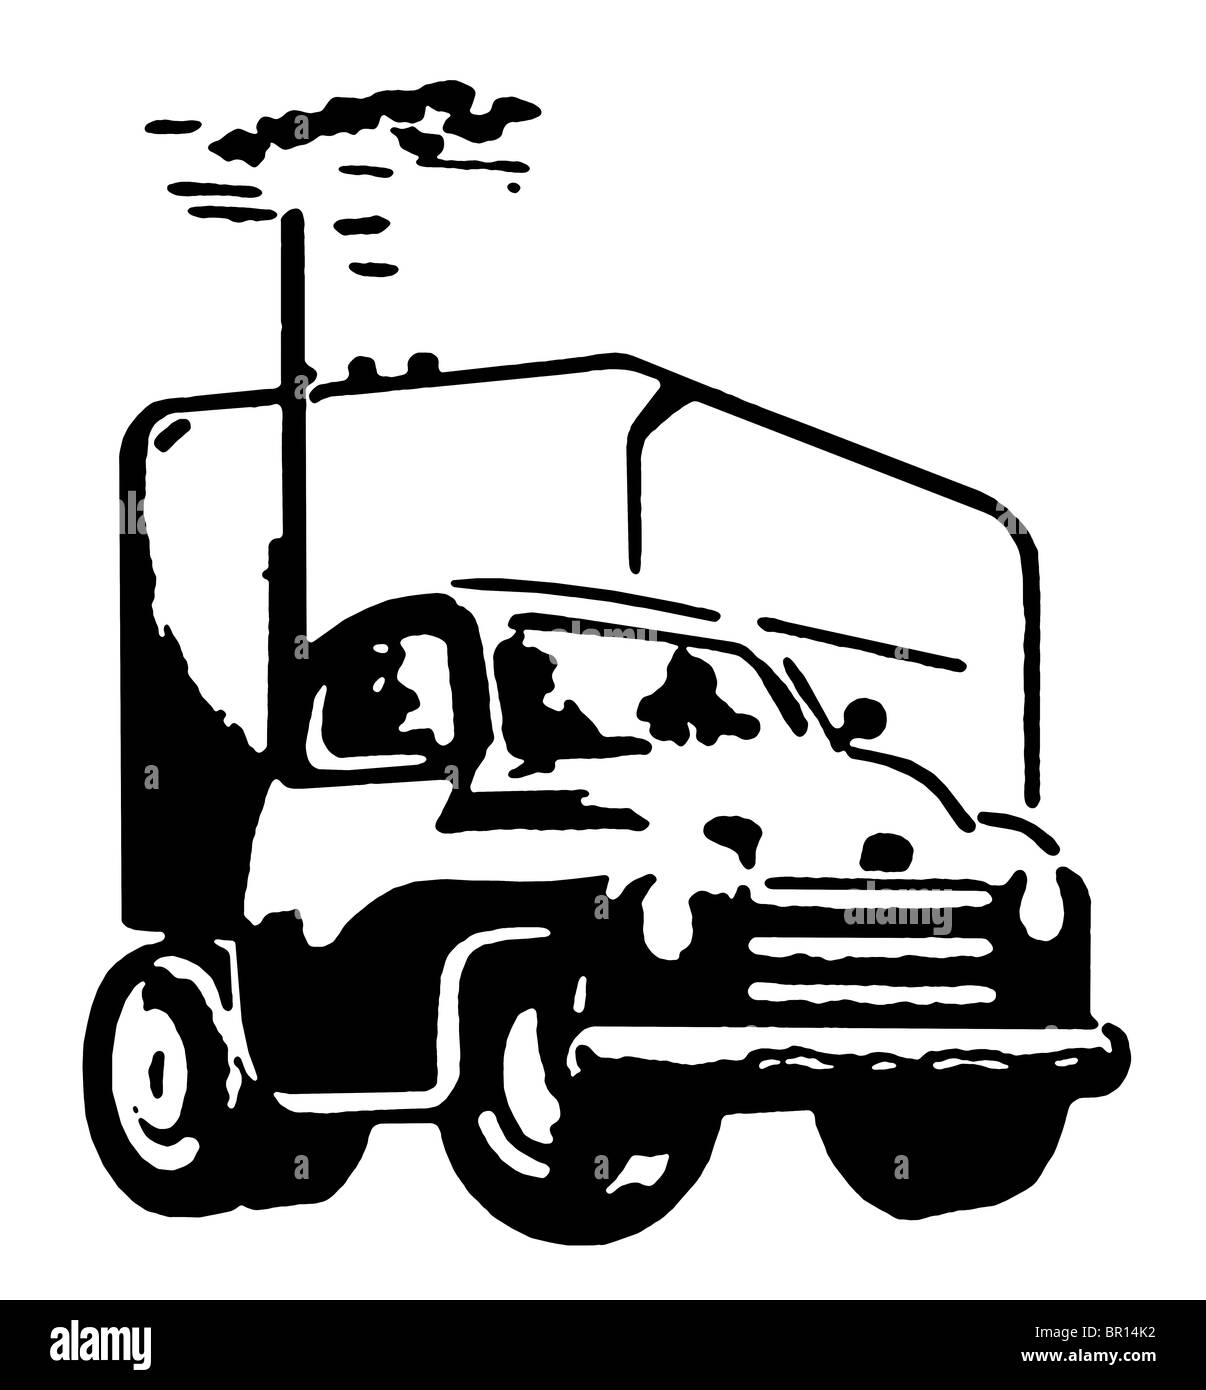 A black and white version of a vintage illustration of a truck Stock Photo